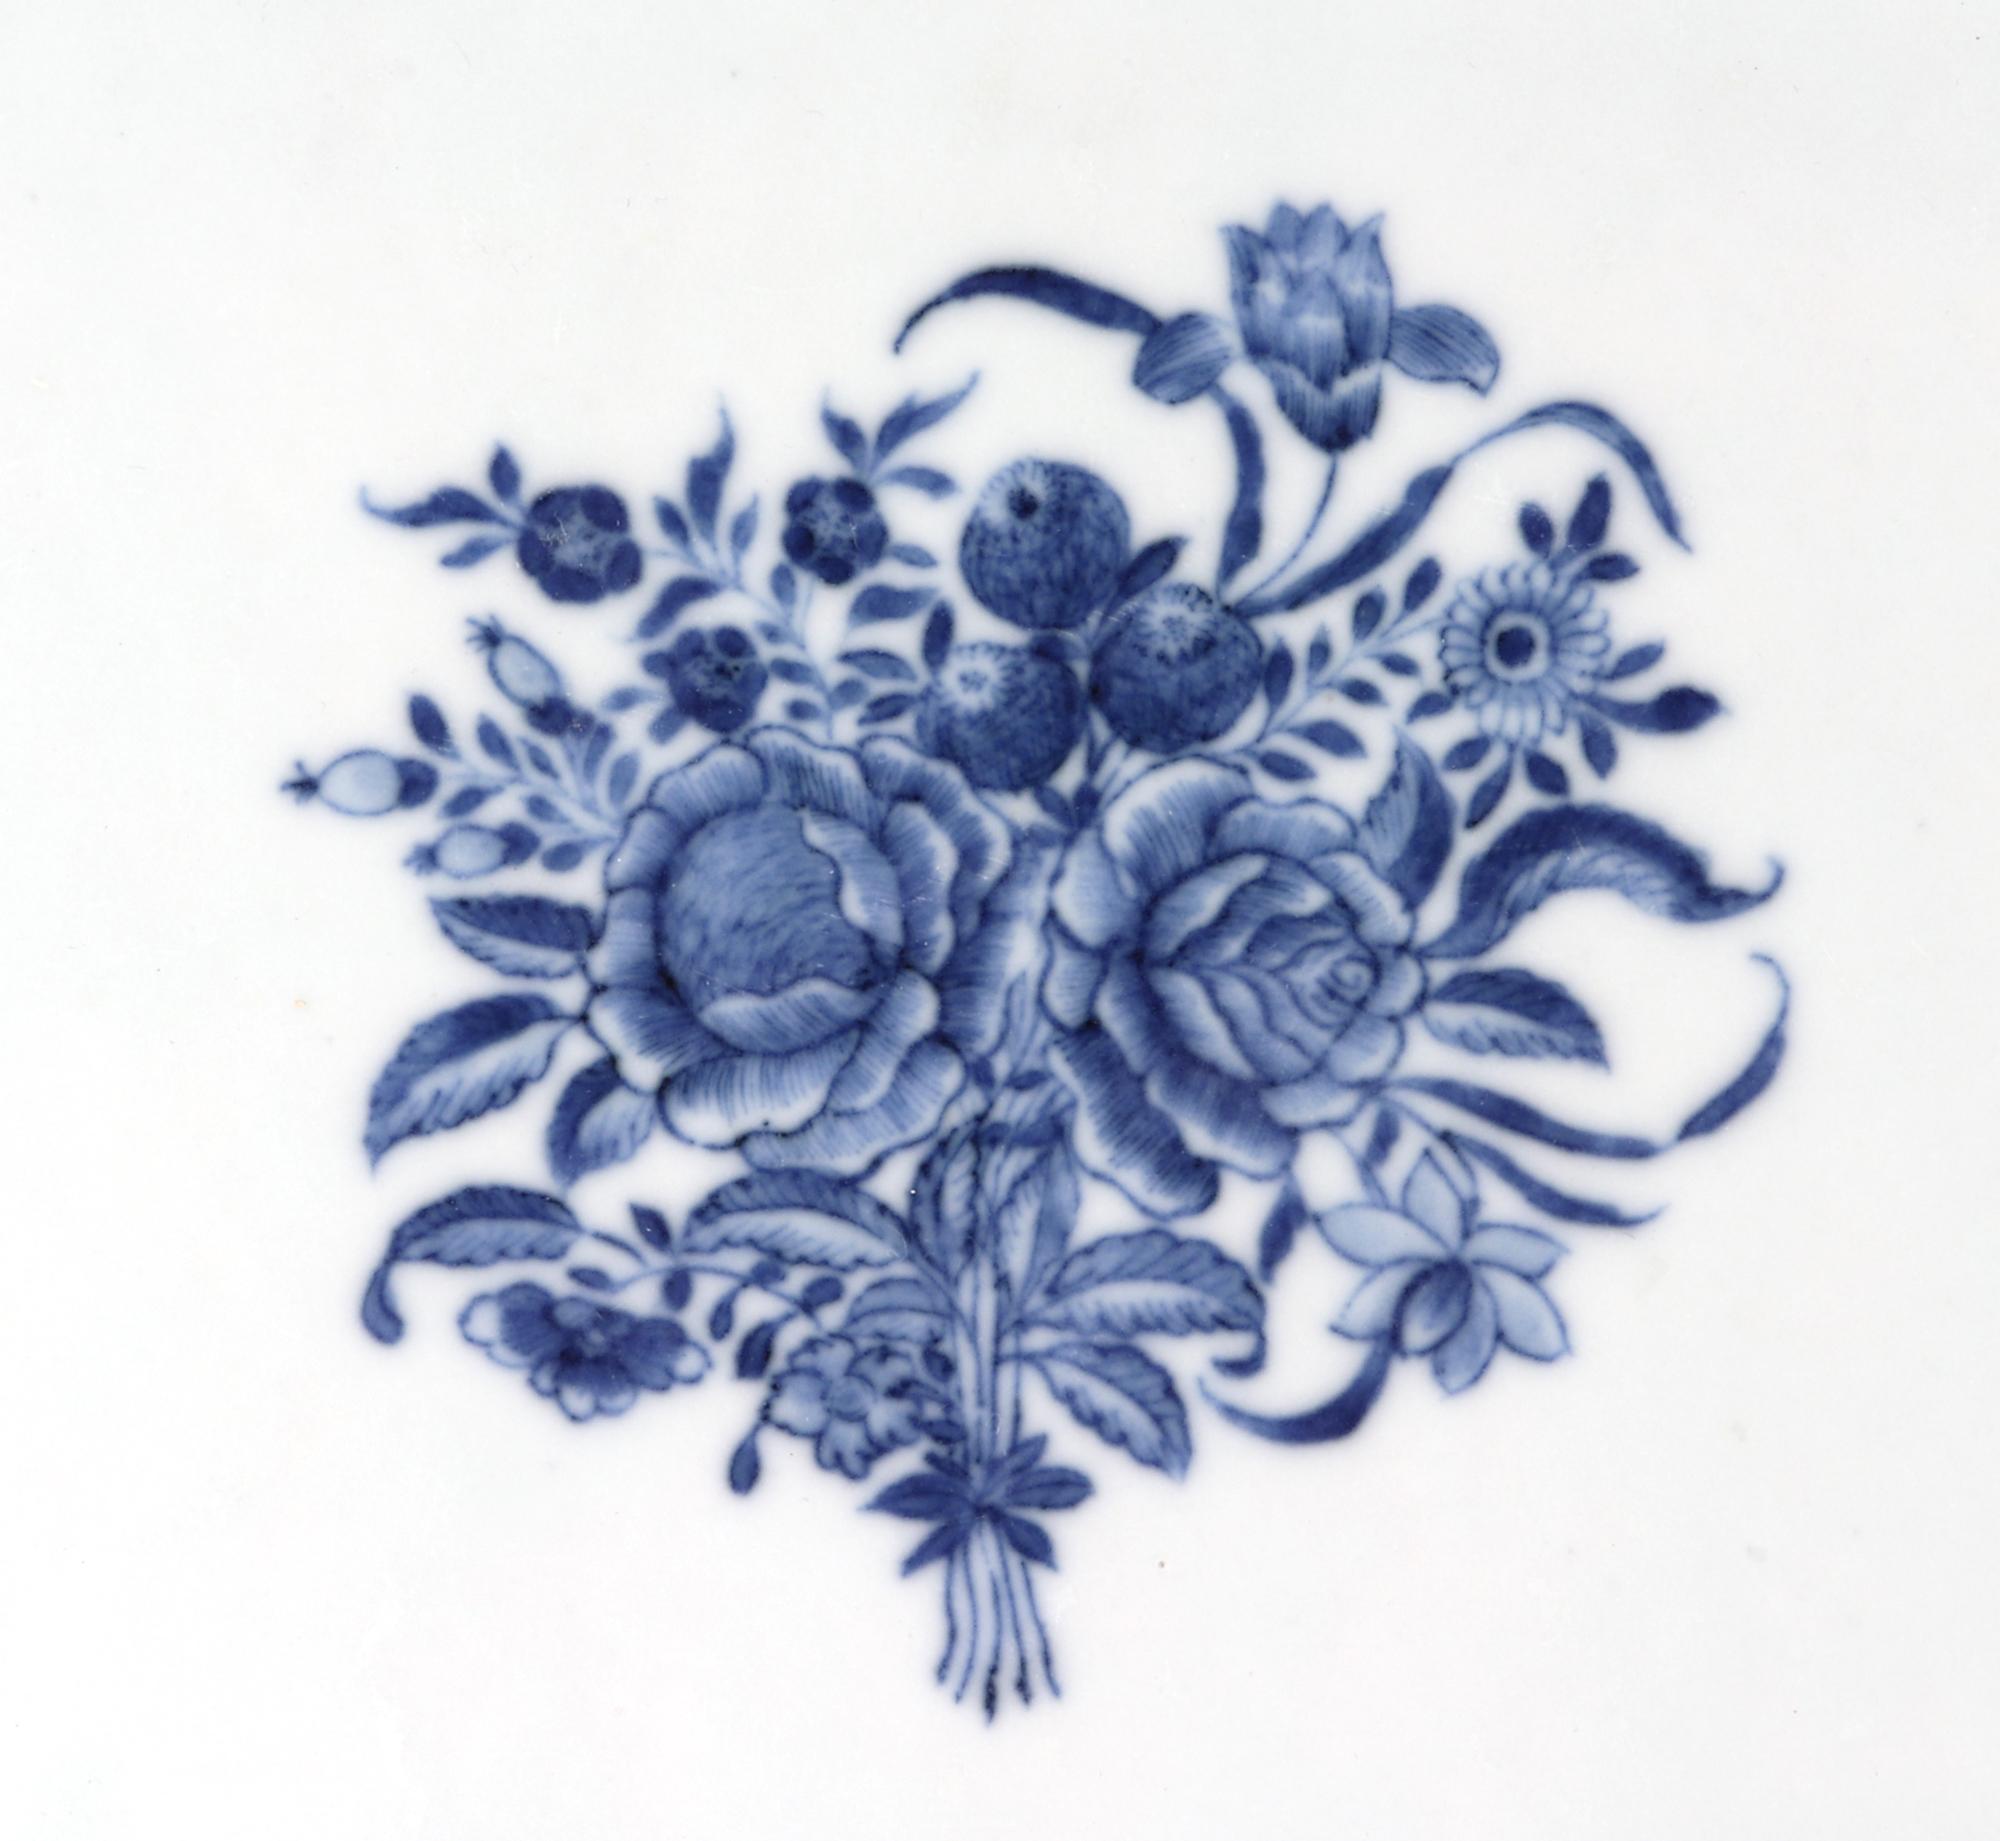 Late 18th Century Chinese Export Underglaze Blue Armorial Porcelain Dish, Arms William Dalrymple